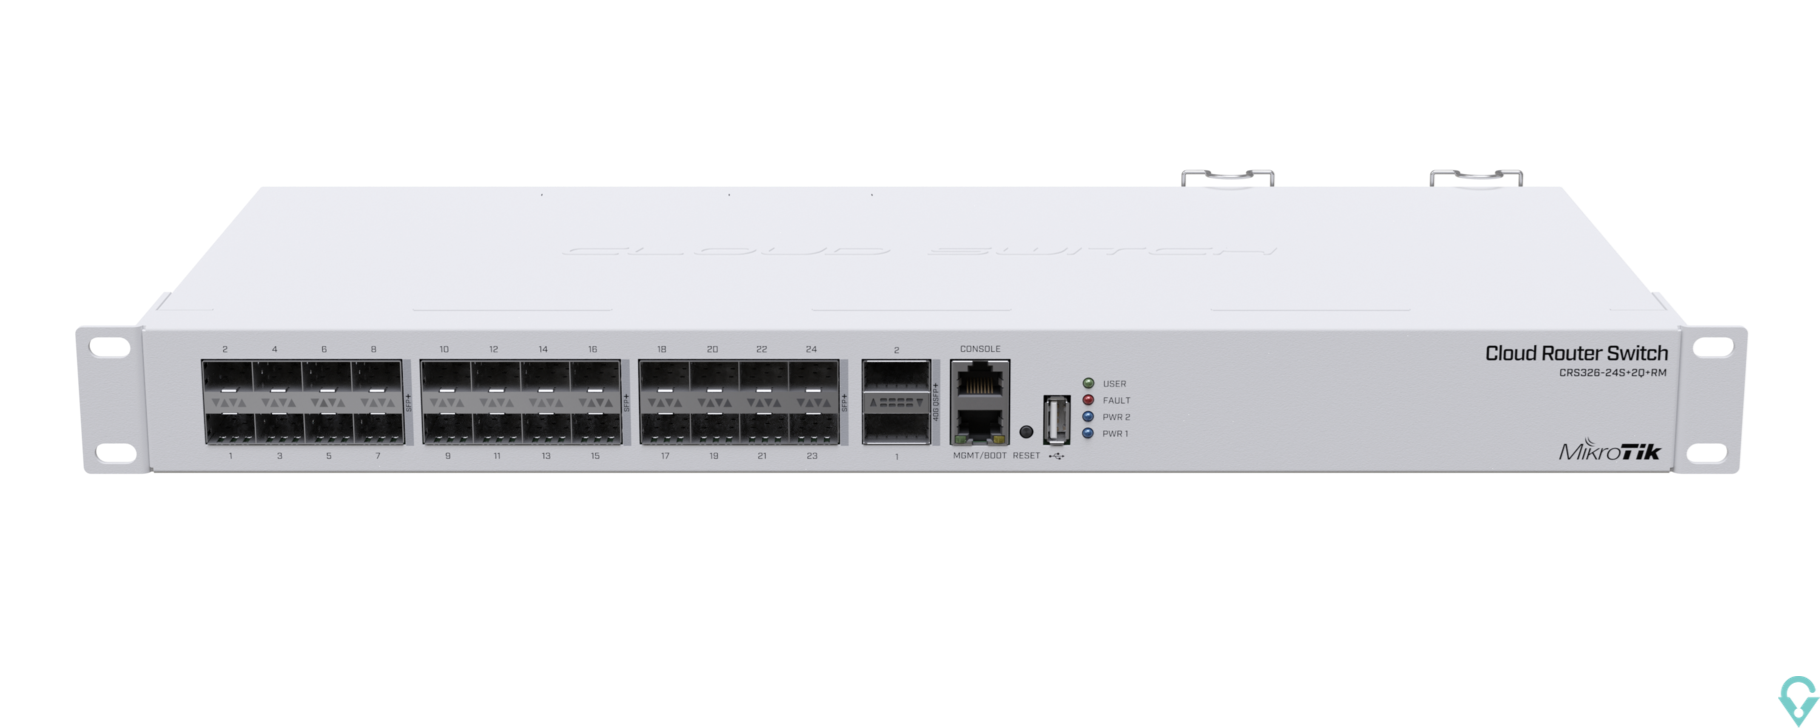 Picture of CRS326-24S+2Q+RM Cloud Router Switch 326-24S+2Q+RM with 2 x 40G QSFP+ cages, 24 10G SFP+ cages, 1x LAN port for management, Rout